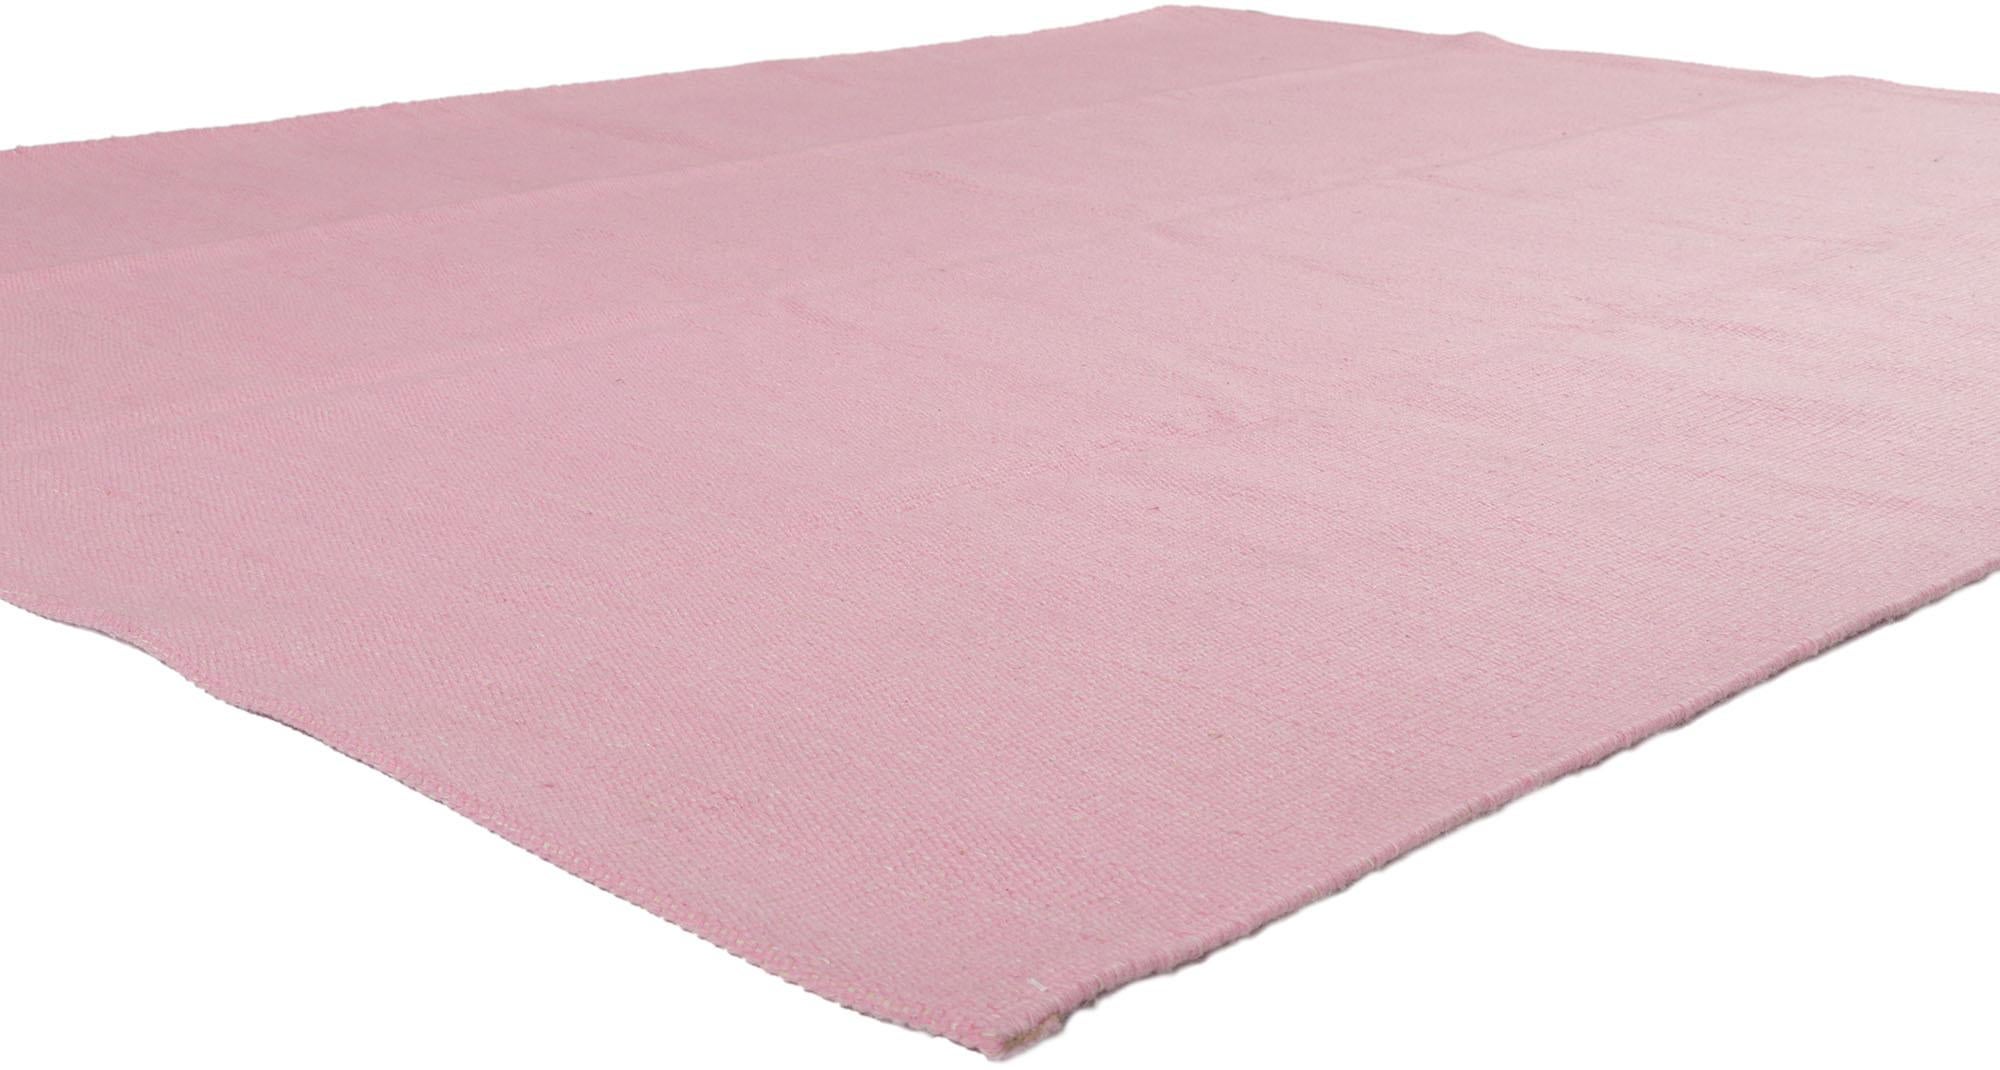 ?30678 New Swedish inspired pink Kilim rug with Scandinavian Modern Style 07'09 x 09'06. ??From subtle to sensation with bohemian hygge vibes, this hand-woven wool Swedish inspired pink Kilim rug beautifully embodies the simplicity of Scandinavian